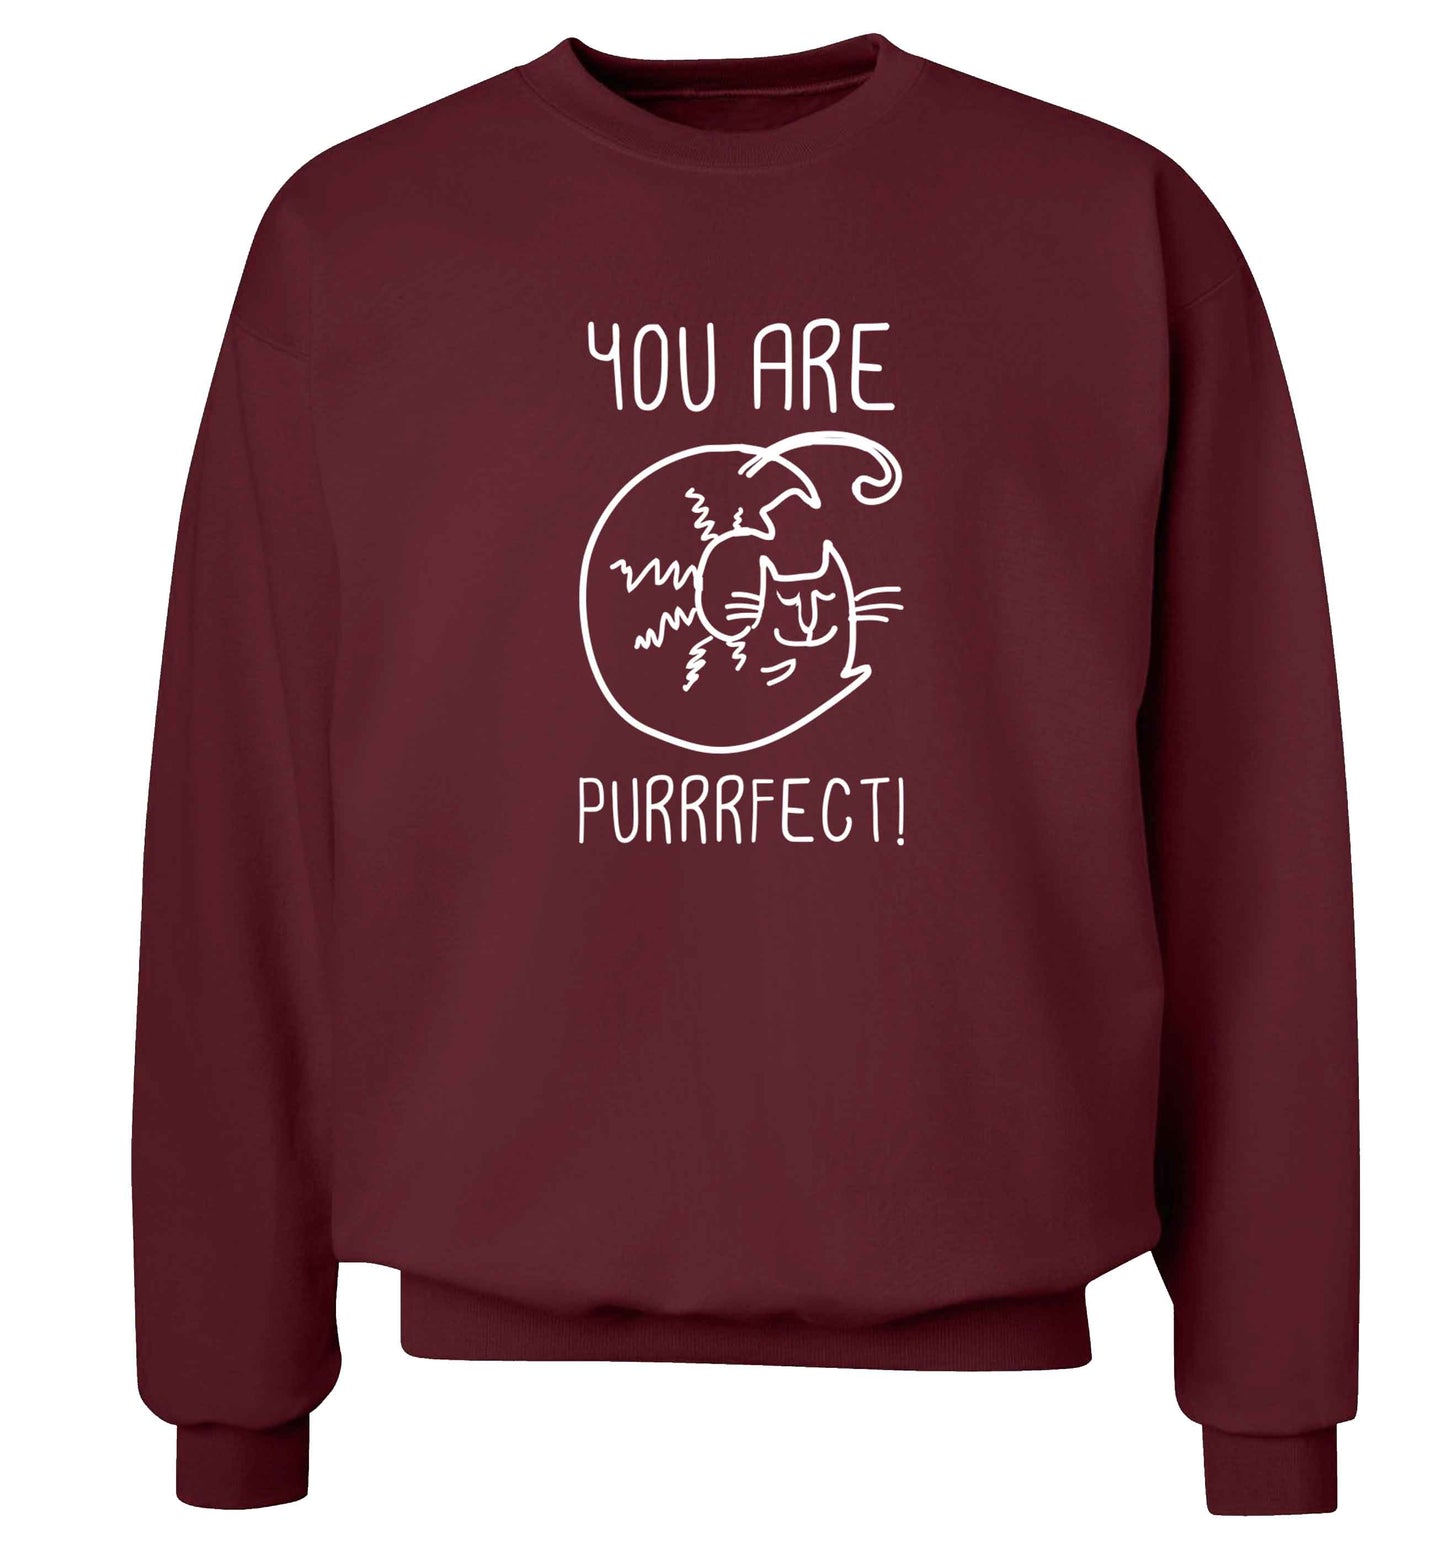 You are purrfect adult's unisex maroon sweater 2XL